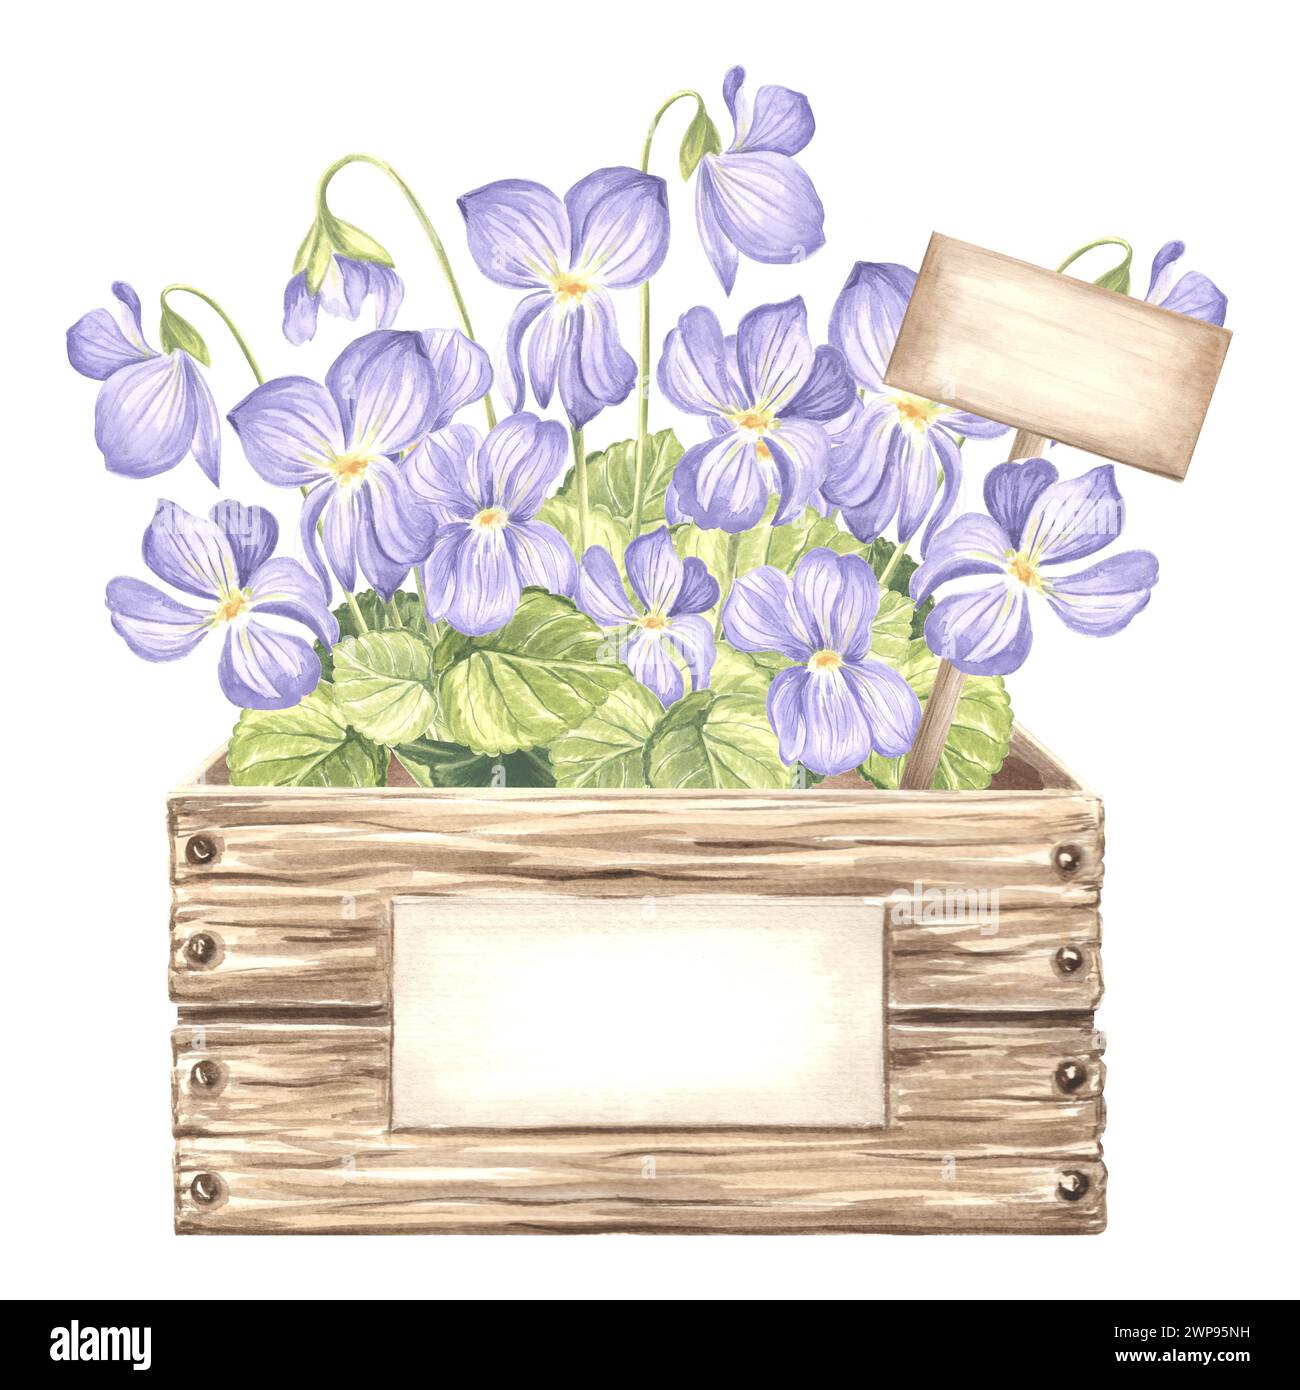 Violets with leaves in wooden box with label. Spring garden flower. Isolated hand drawn watercolor botanical illustration. Floral drawing template for Stock Photo